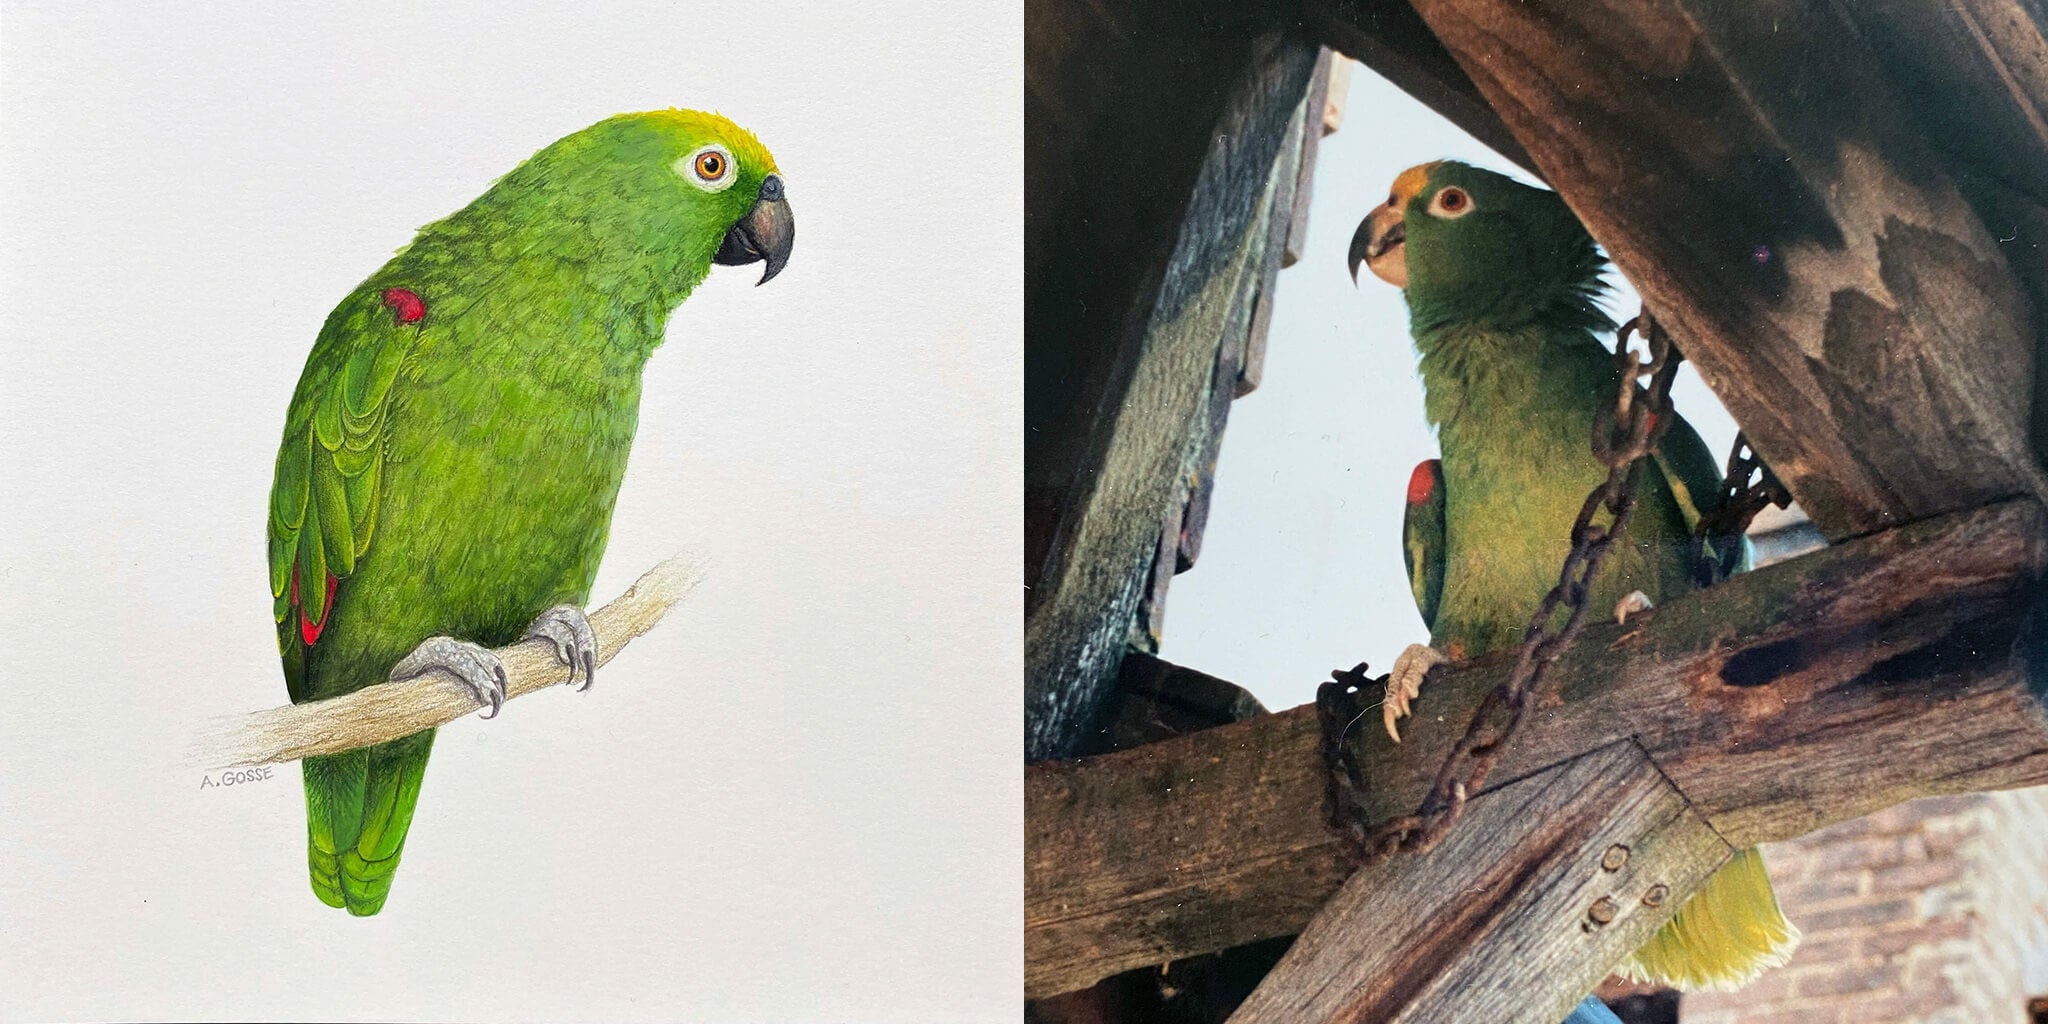 Maestro, a painting by bird artist amanda gosse of a green parrot that was the family pet for many years